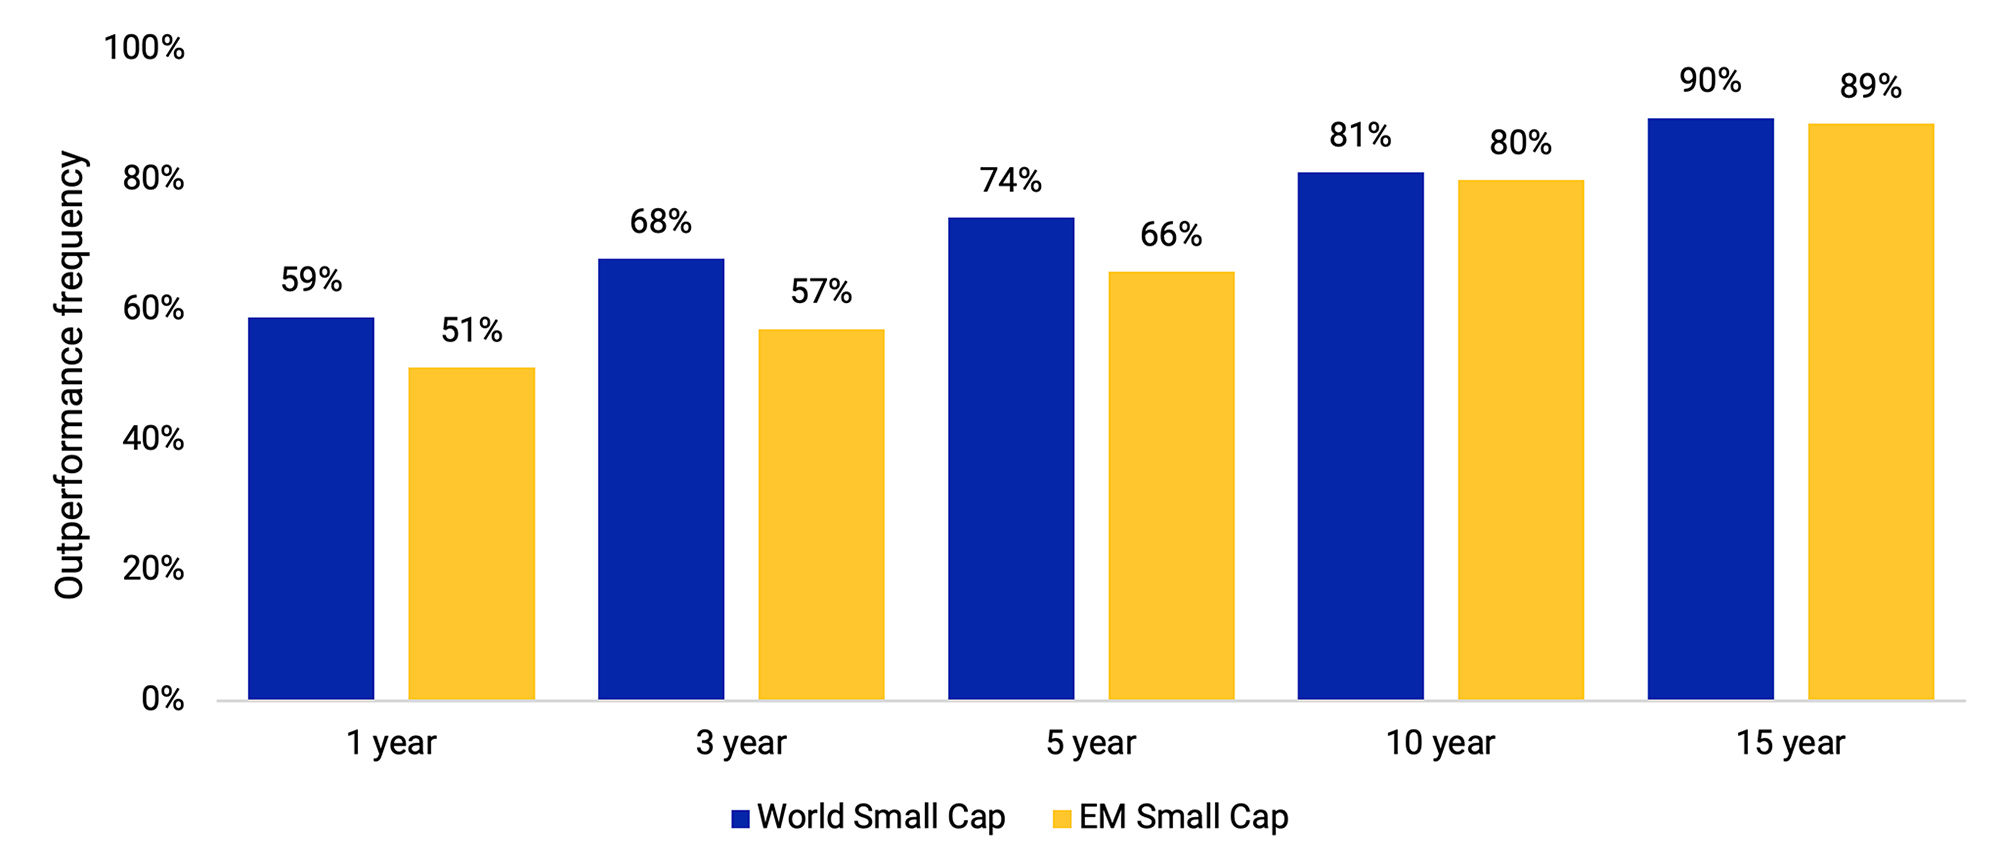 This exhibit is a bar chart that shows the historical frequency of small-cap outperformance versus large-cap stocks for the world and emerging markets regions for 1-, 3-, 5-, 10-, and 15-year horizons. The analysis period for the world region is November 1975 to June 2023 and for the emerging markets region is December 1998 to June 2023